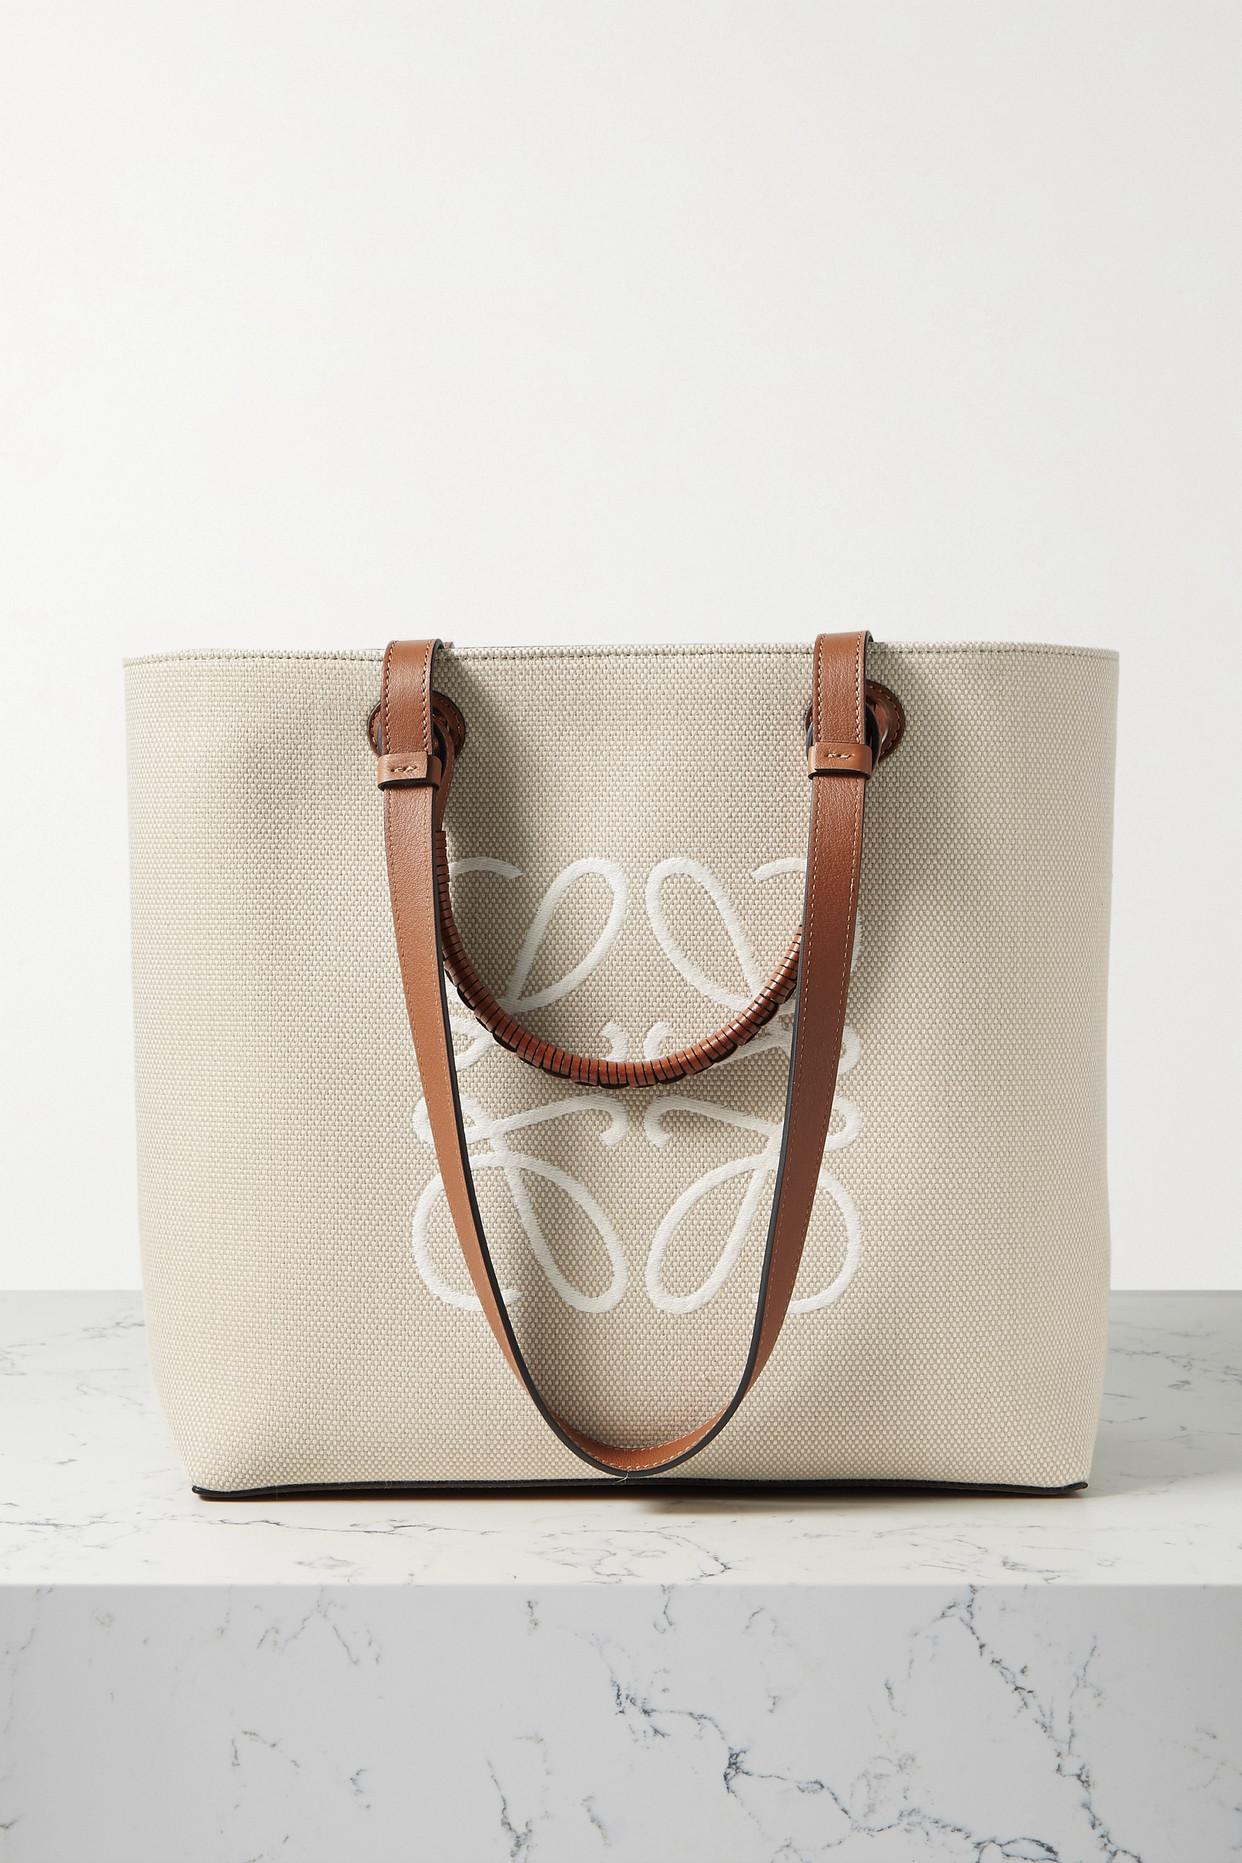 Loewe Anagram Tote review: jacquard canvas and calfskin lining